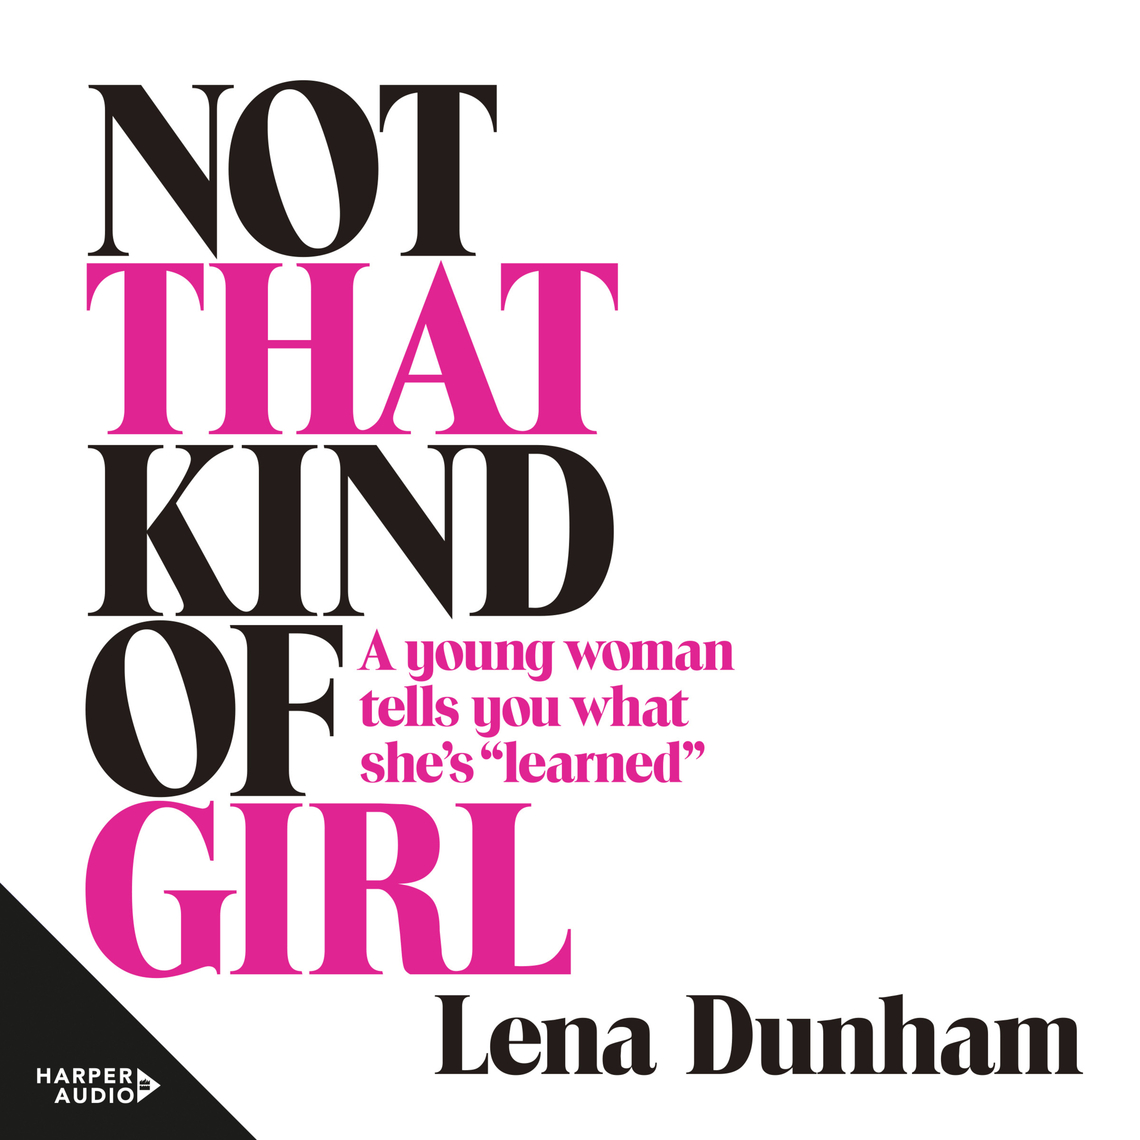 Not　by　that　of　Audiobook　Kind　Girl　Dunham　Lena　Scribd